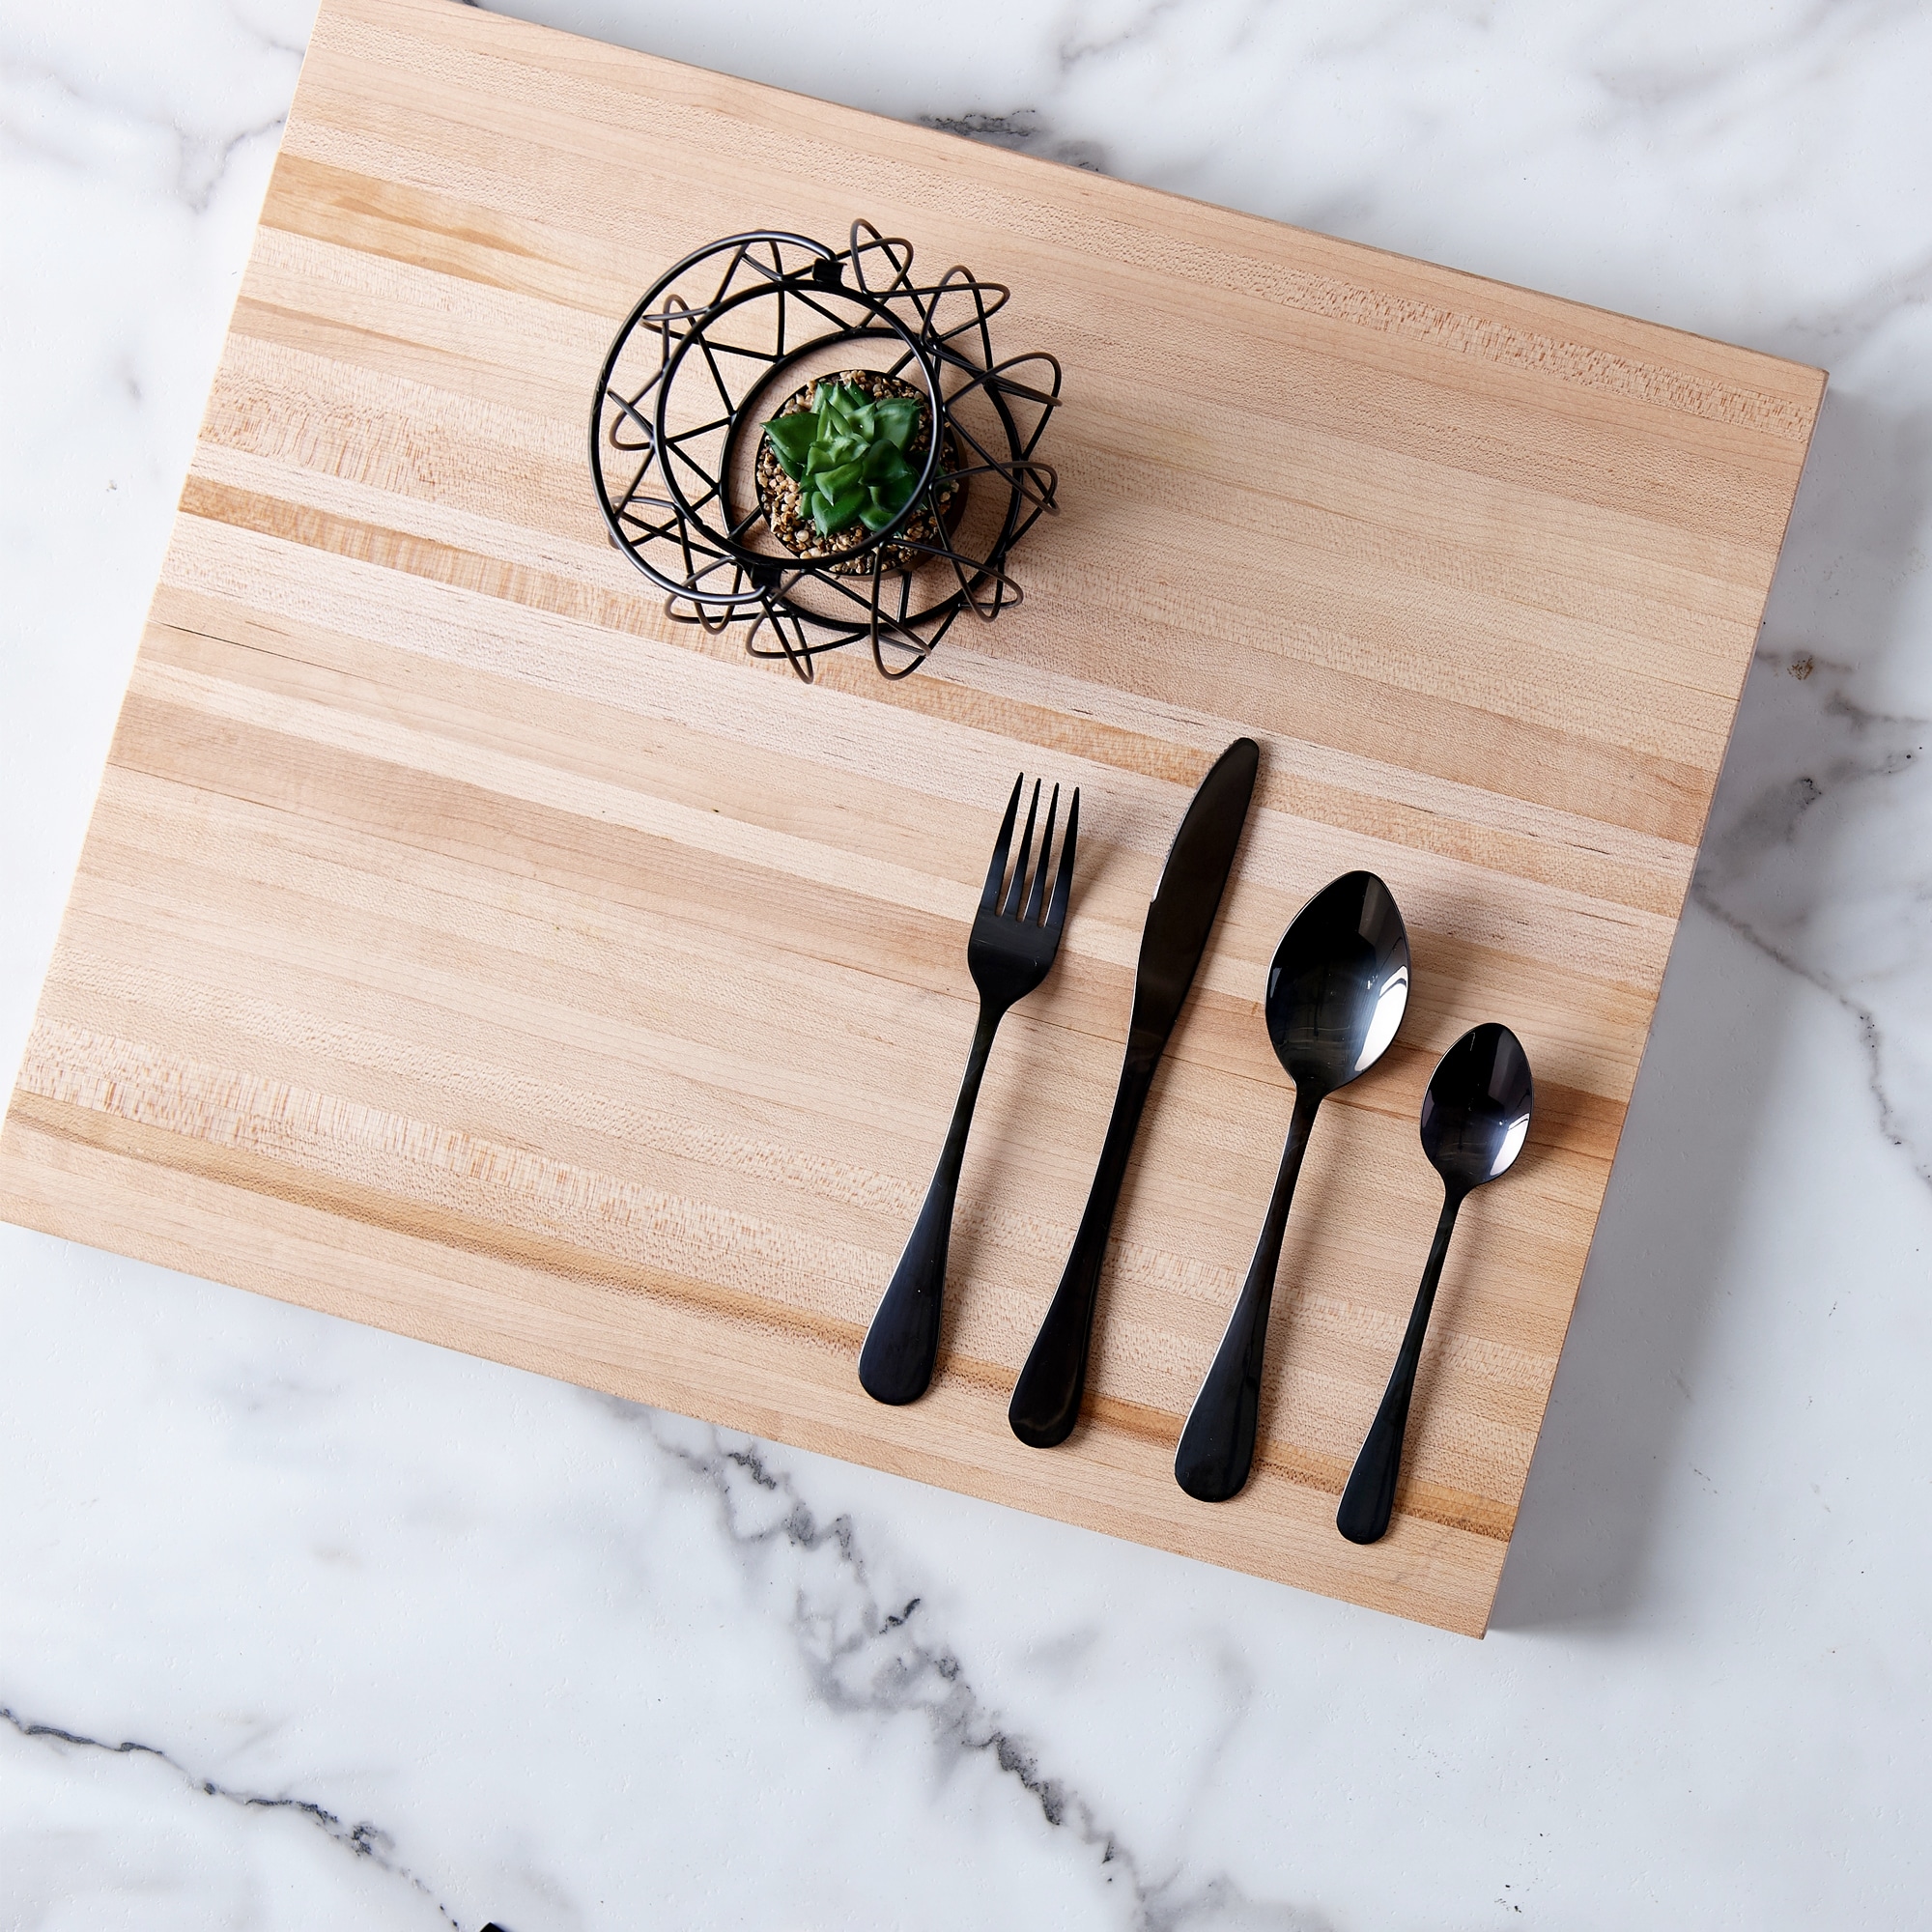 https://ak1.ostkcdn.com/images/products/is/images/direct/8c7bcc21f2d915d75a1c81de4c78af561cba00ff/Flatware-Stainless-Steel-Onyx-Black-16PC-Set.jpg